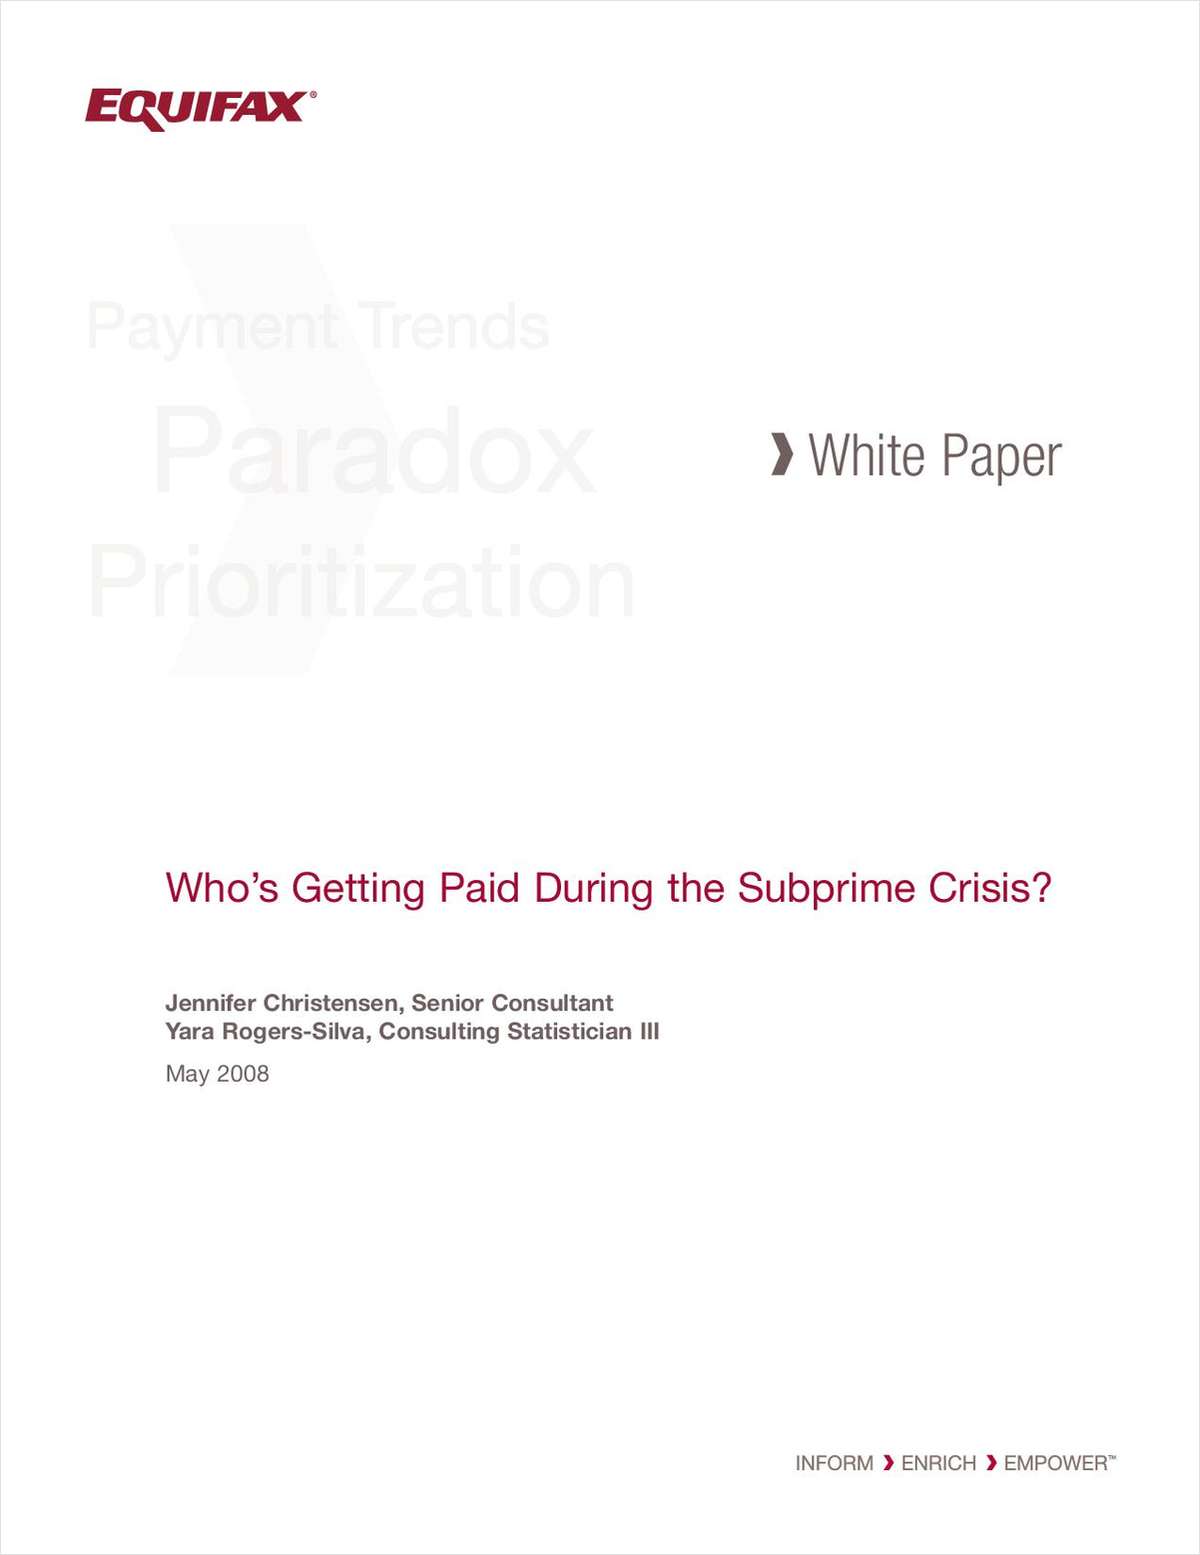 Who's Getting Paid During the Subprime Crisis?